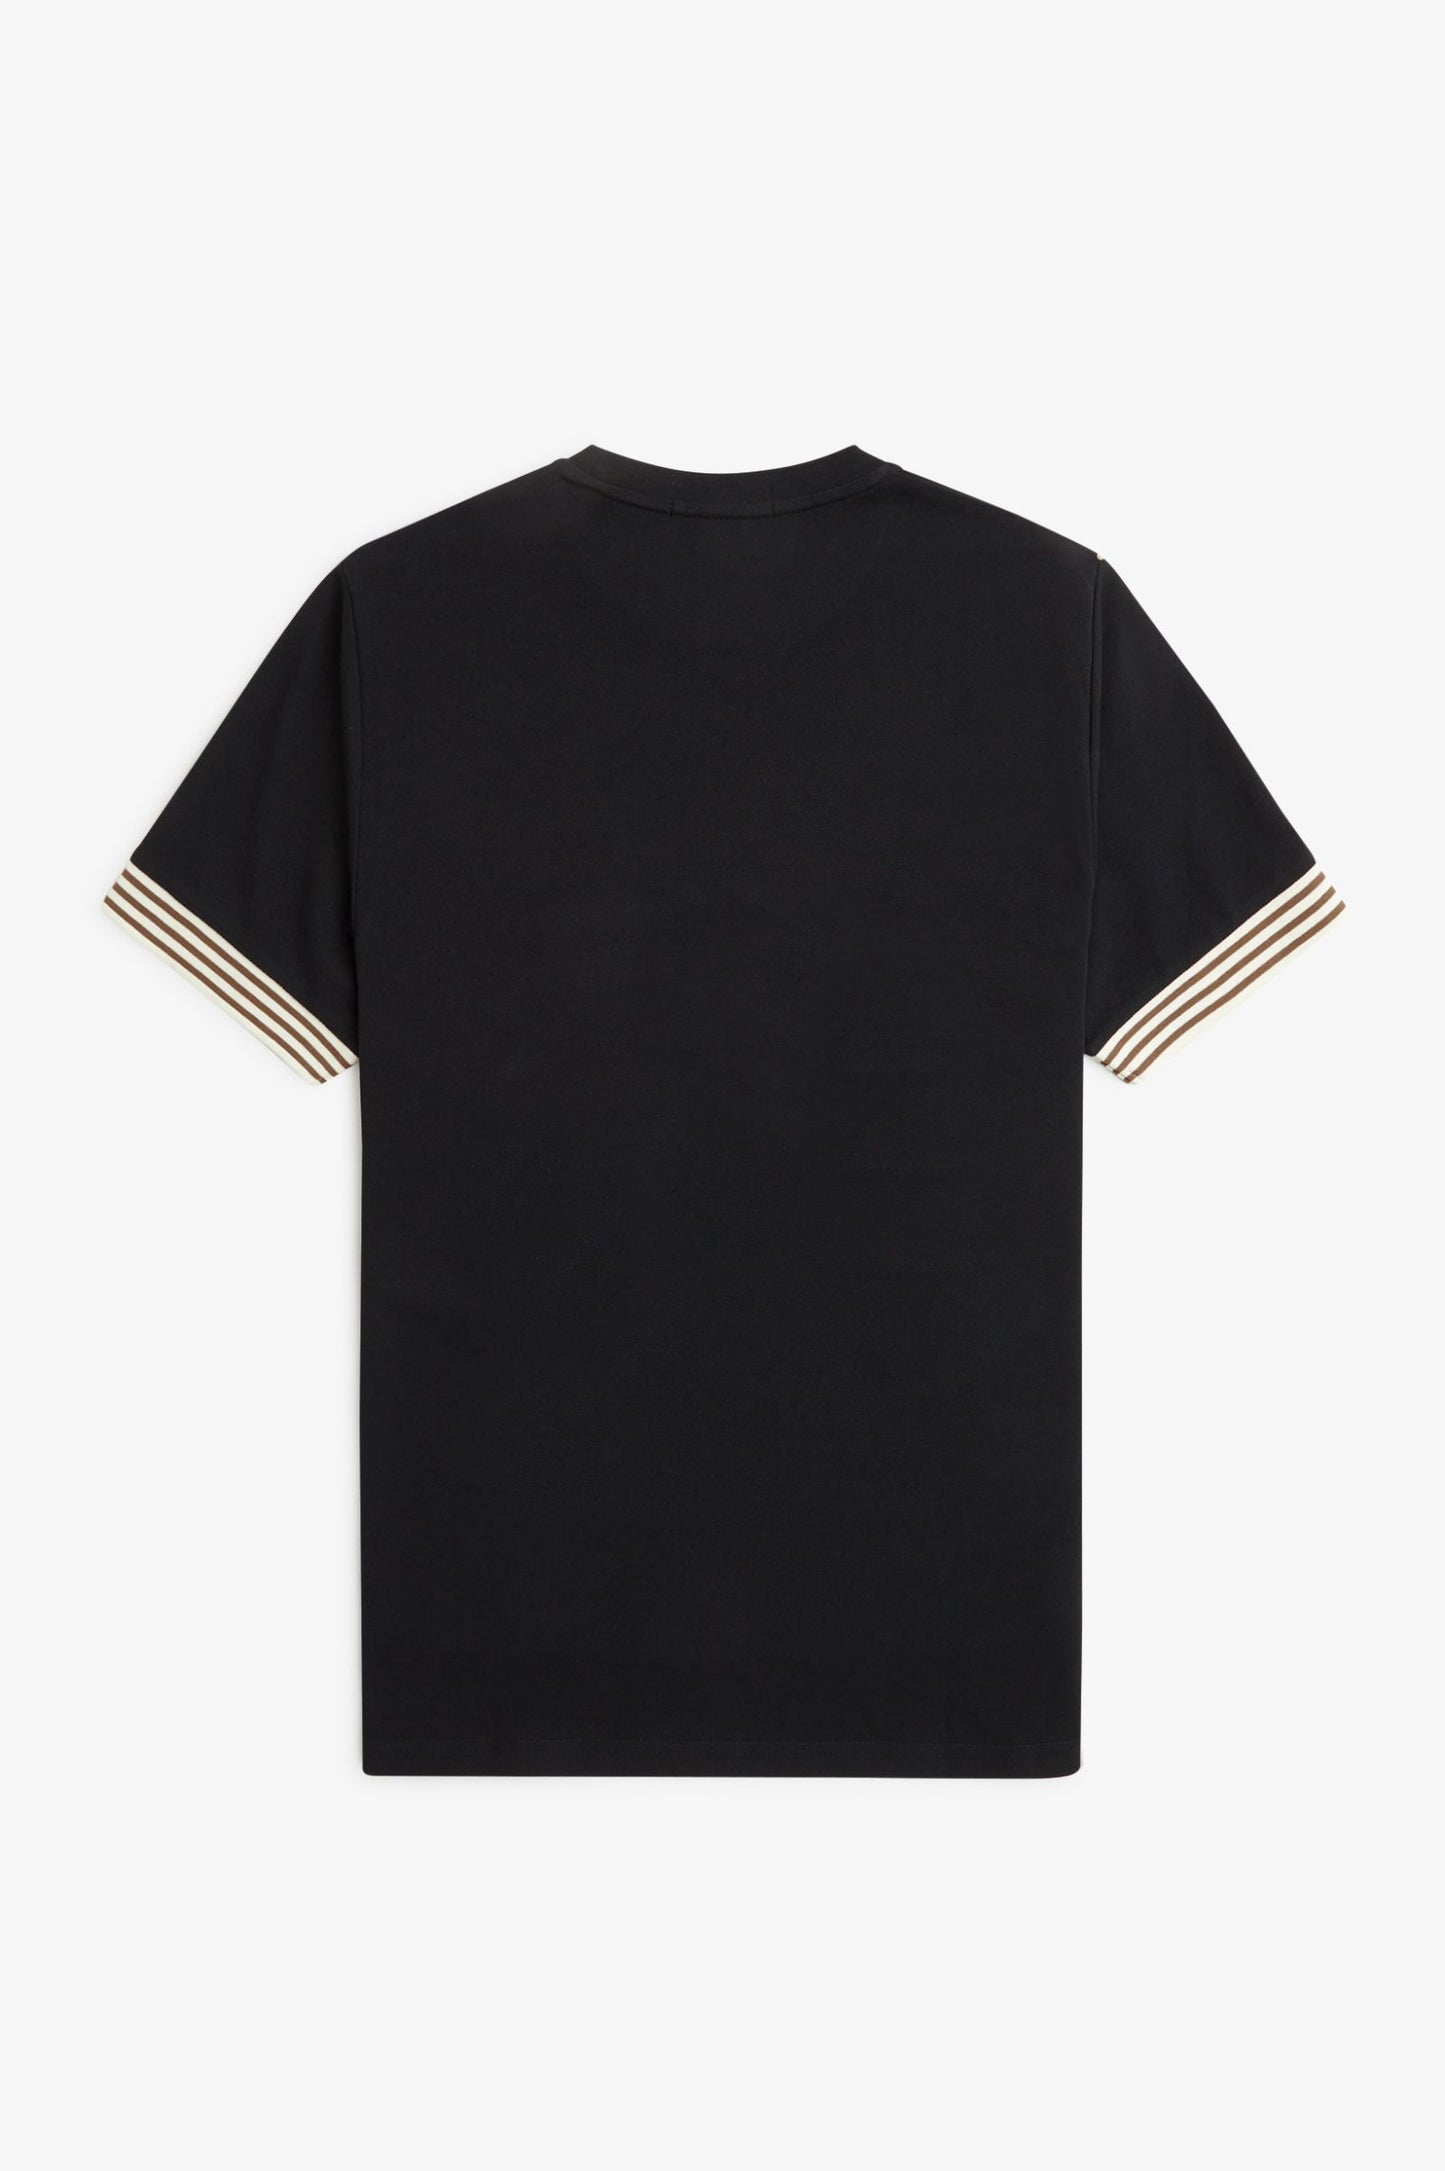 Fred Perry Striped Cuff T-Shirt